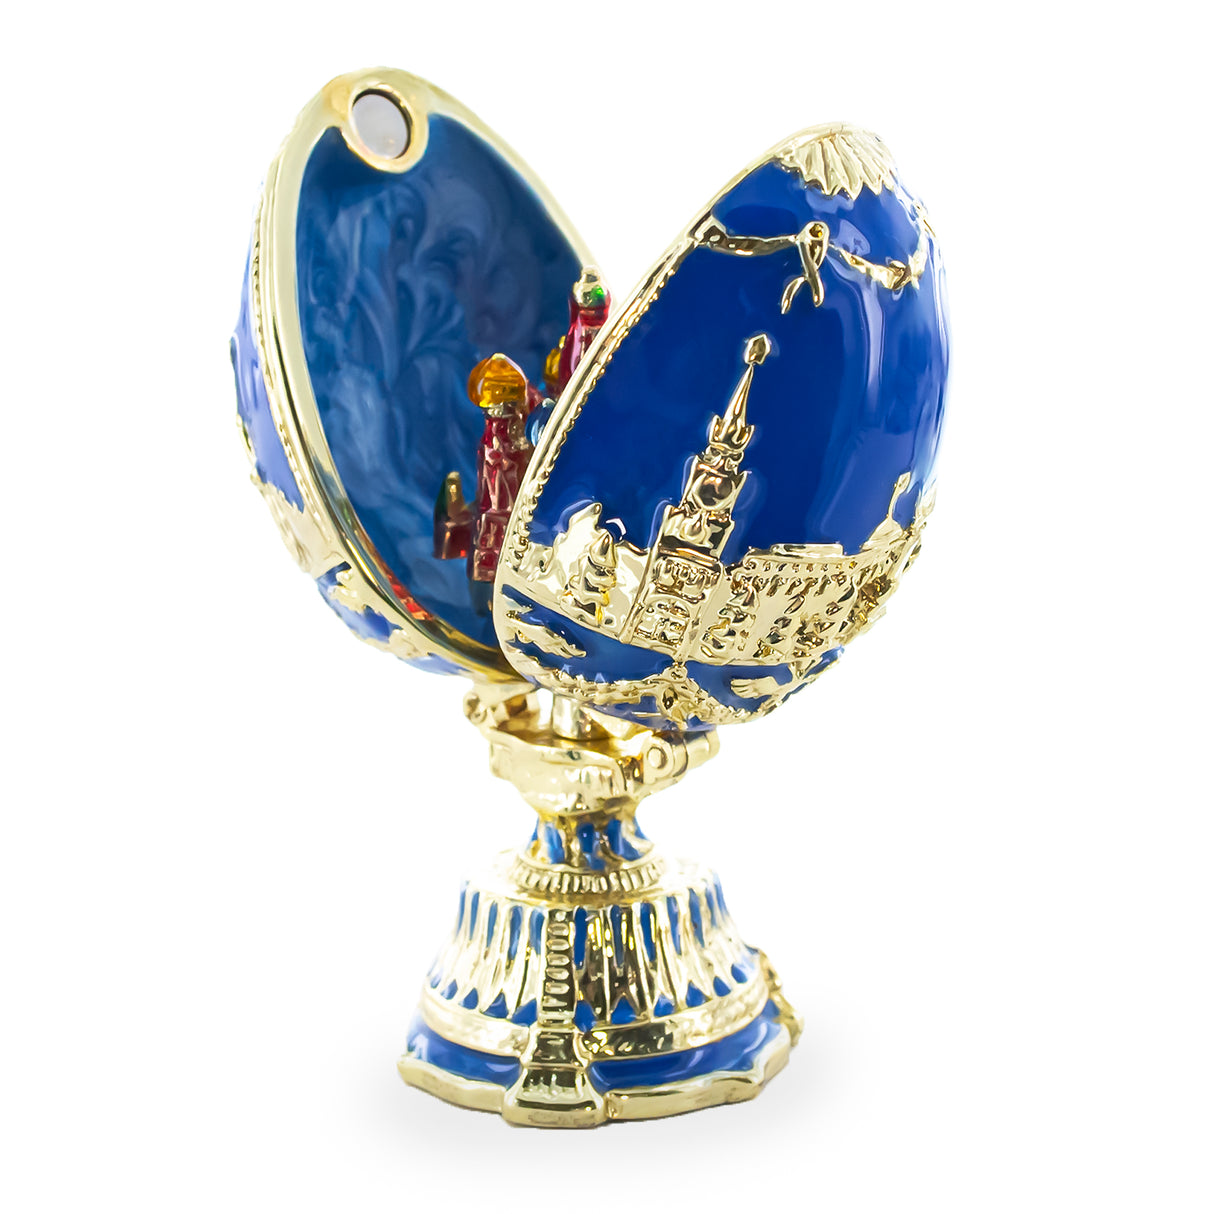 The City Blue Enamel Royal Inspired Easter Egg 2.75 Inches ,dimensions in inches: 2.75 x 3.72 x 2.38